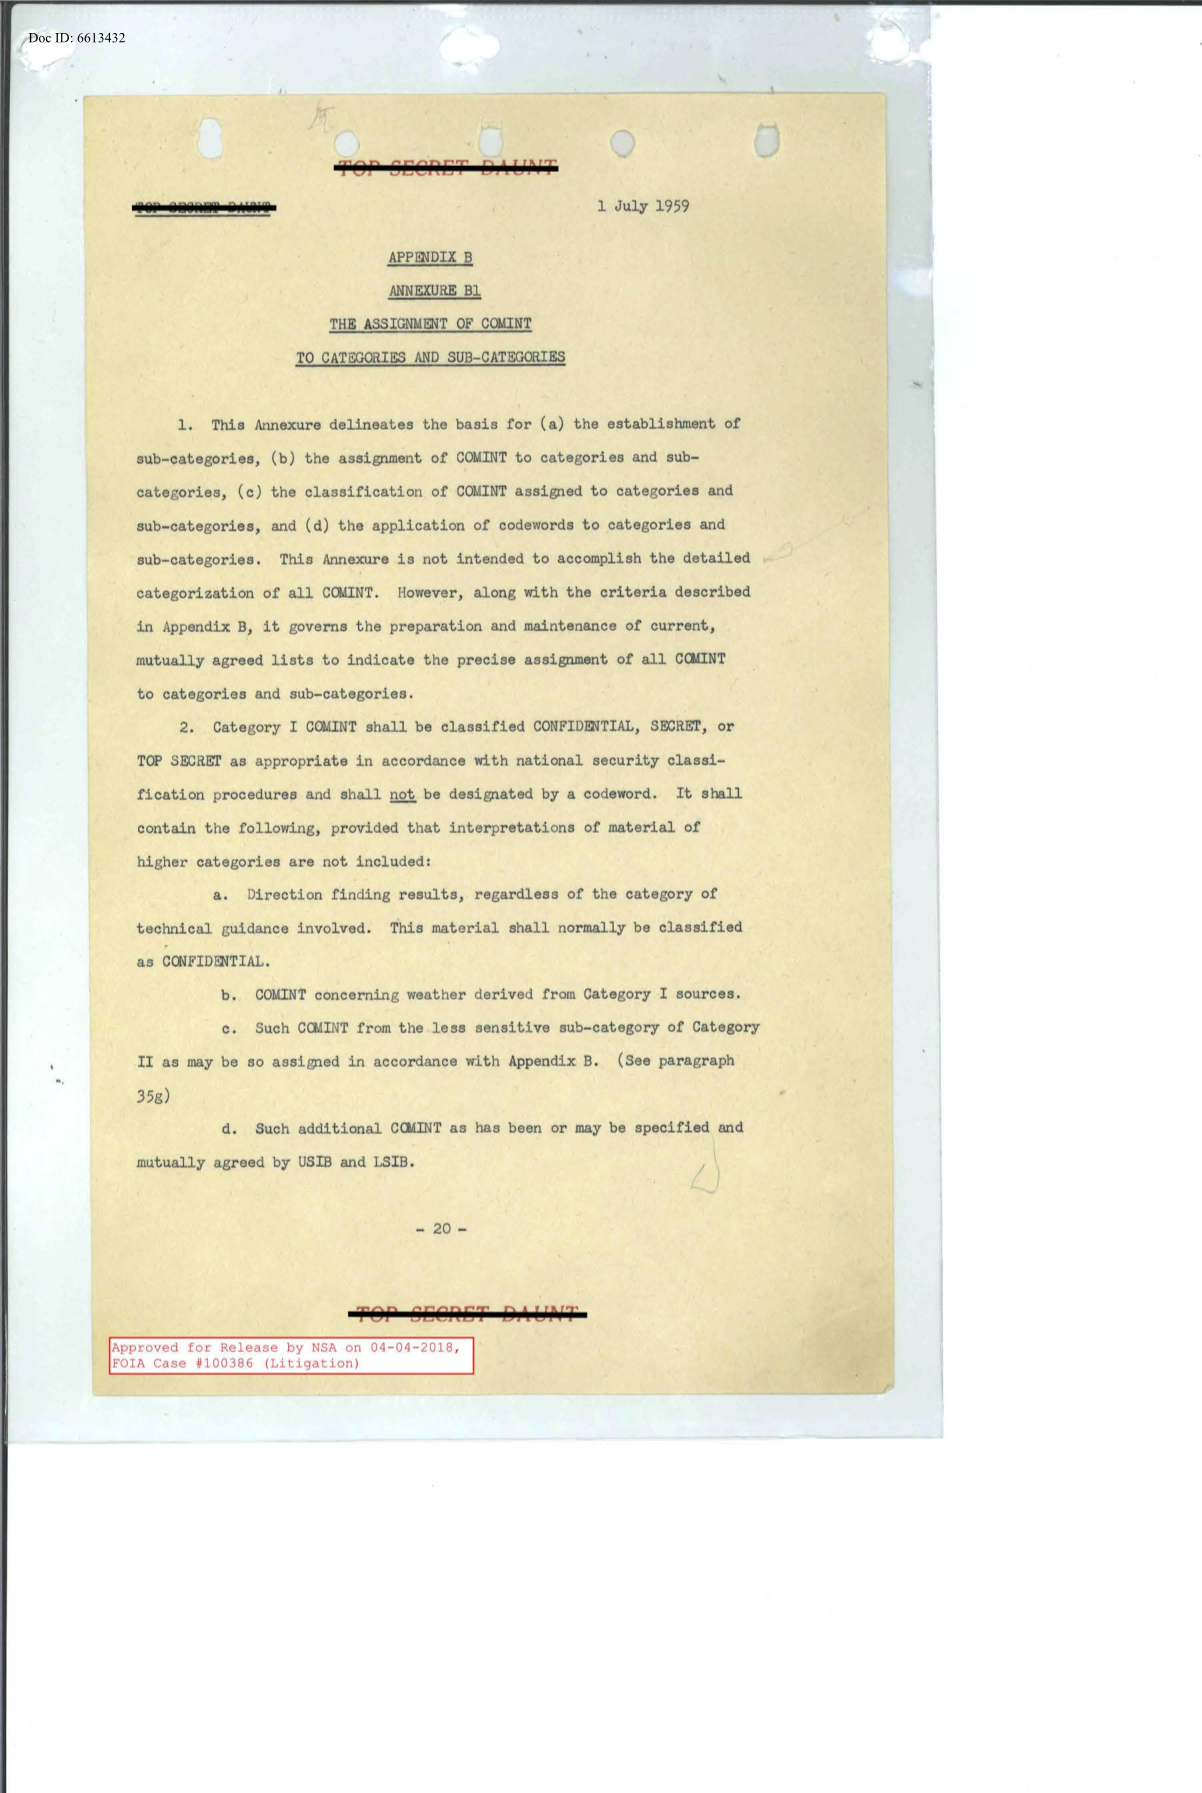  THE_ASSIGNMENT_OF_COMINT_TO_CATEGORIES_AND_SUB-CATEGORIES_APPENDIX_D_ANNEXURE_B1_1_JULY_1959.PDF